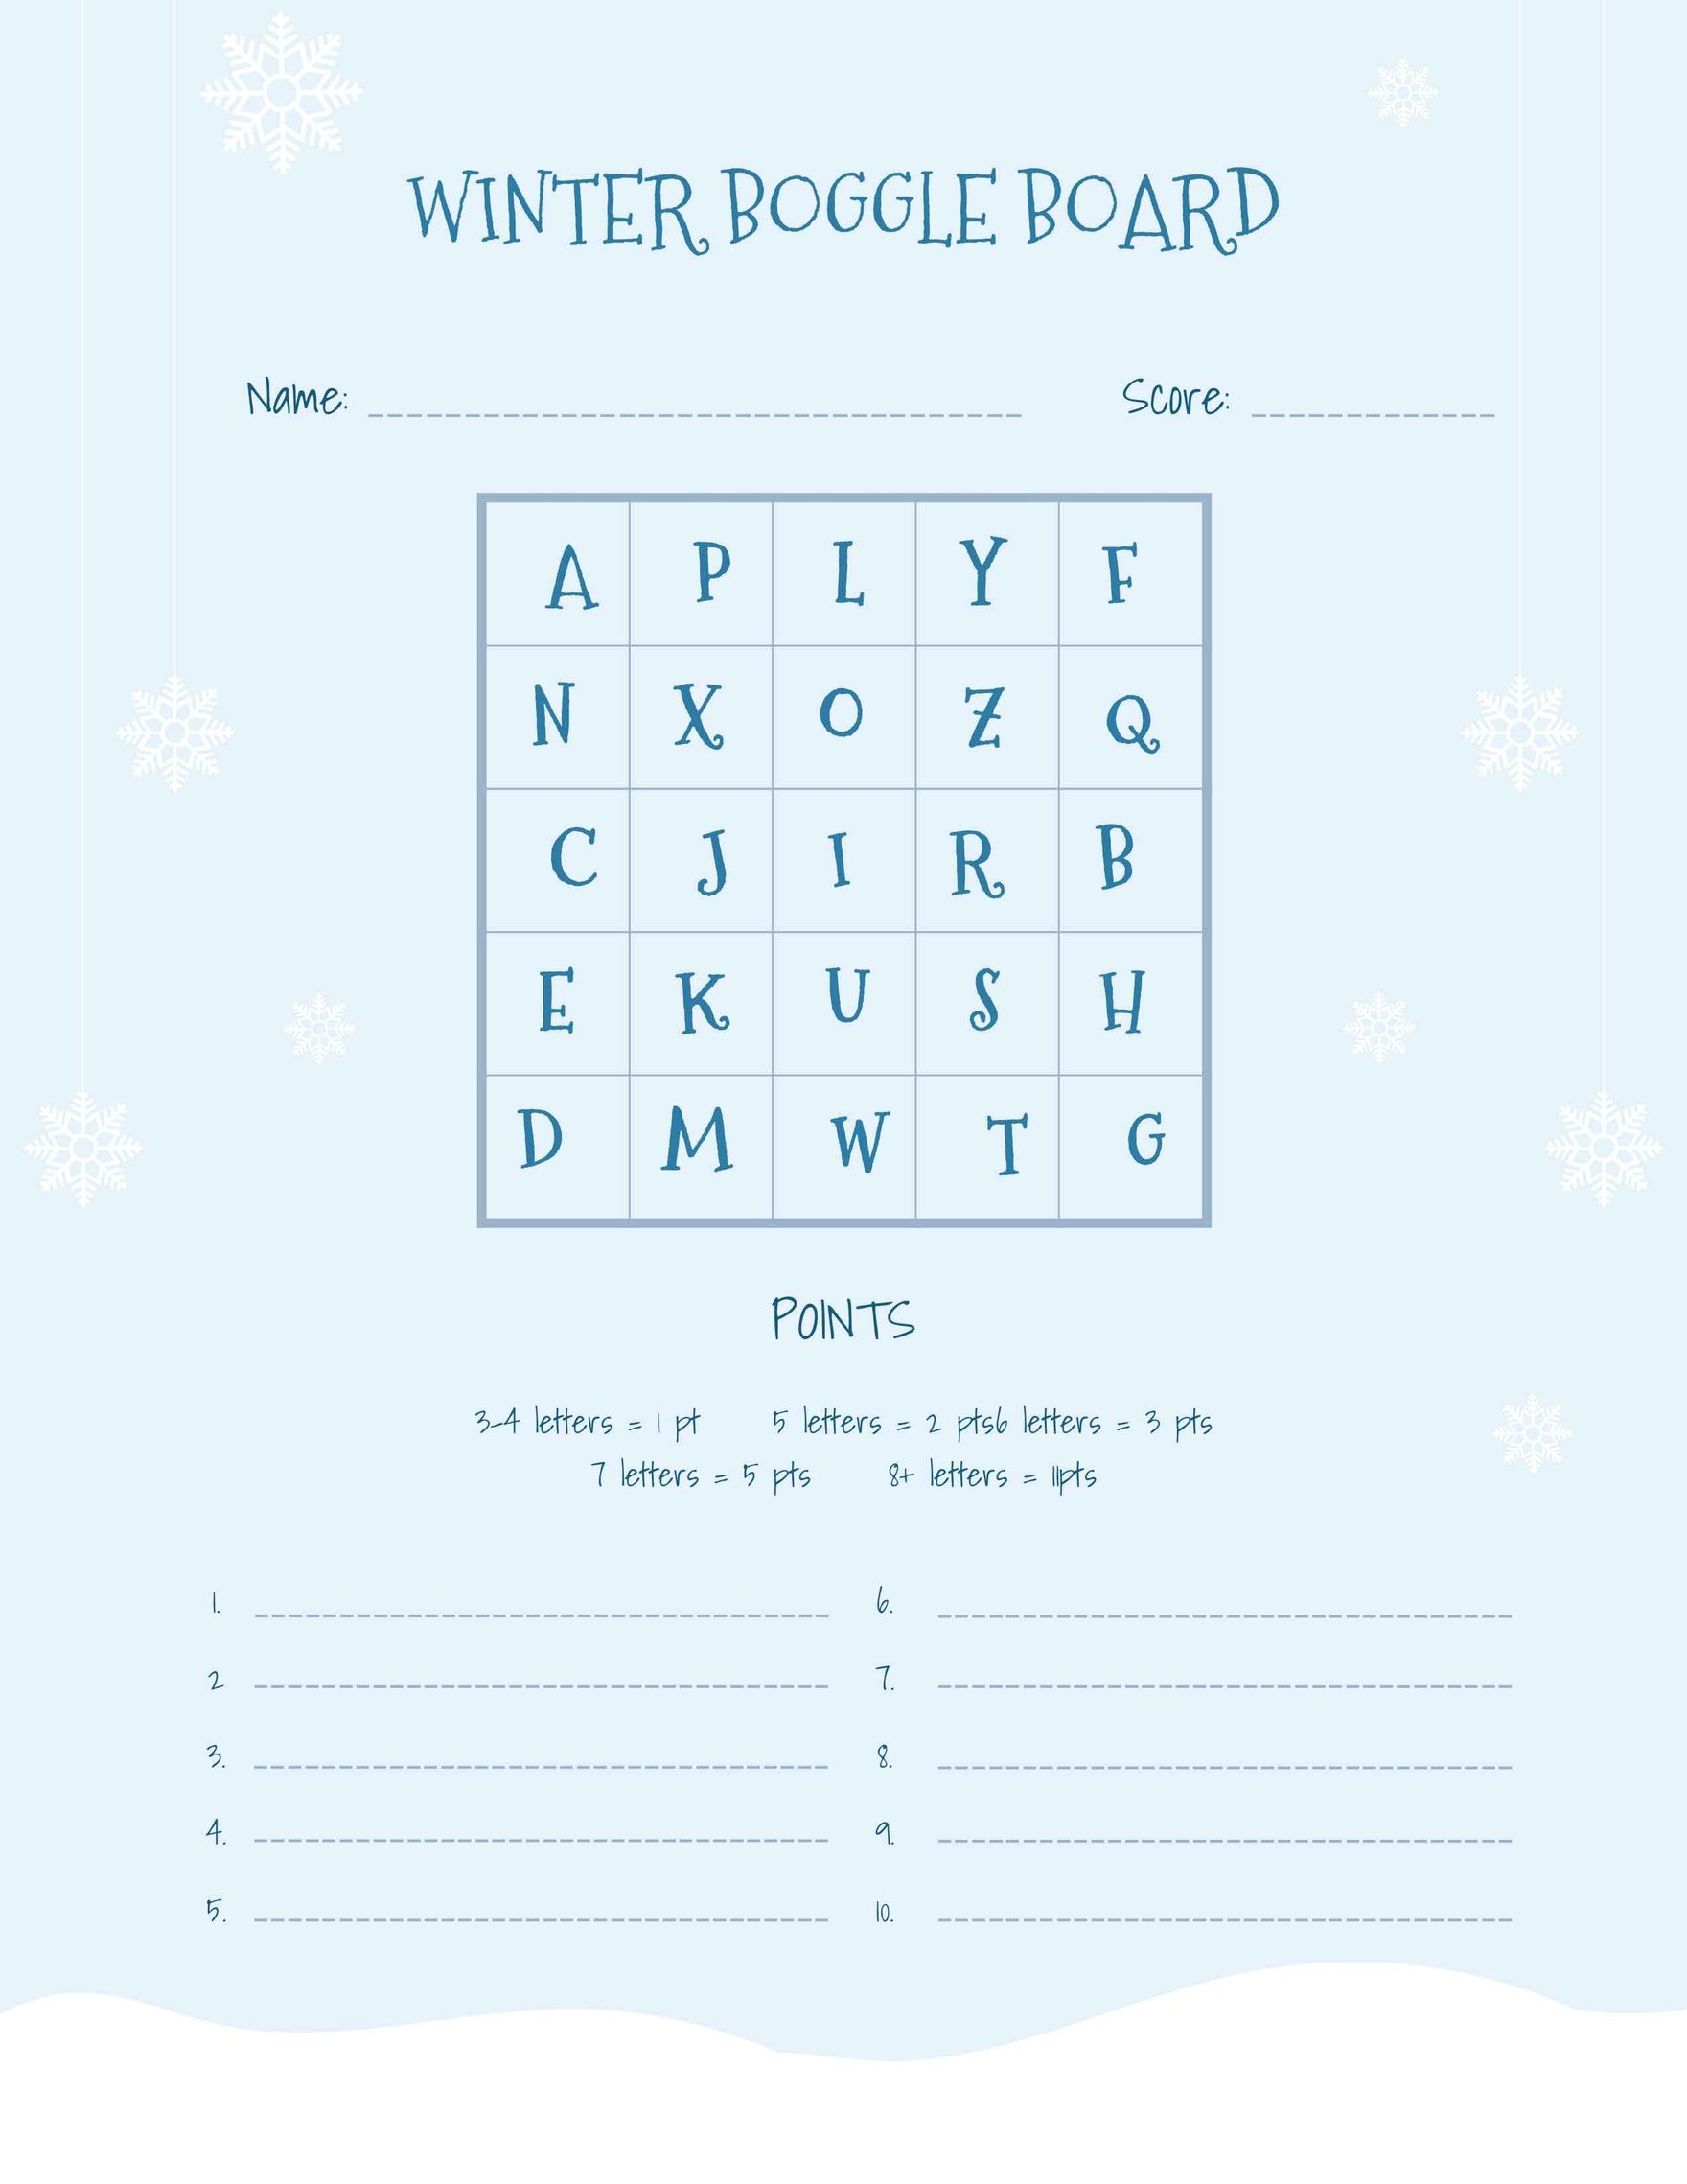 Winter Boggle Bulletin Board Template in Word, Google Docs, PDF, Apple Pages